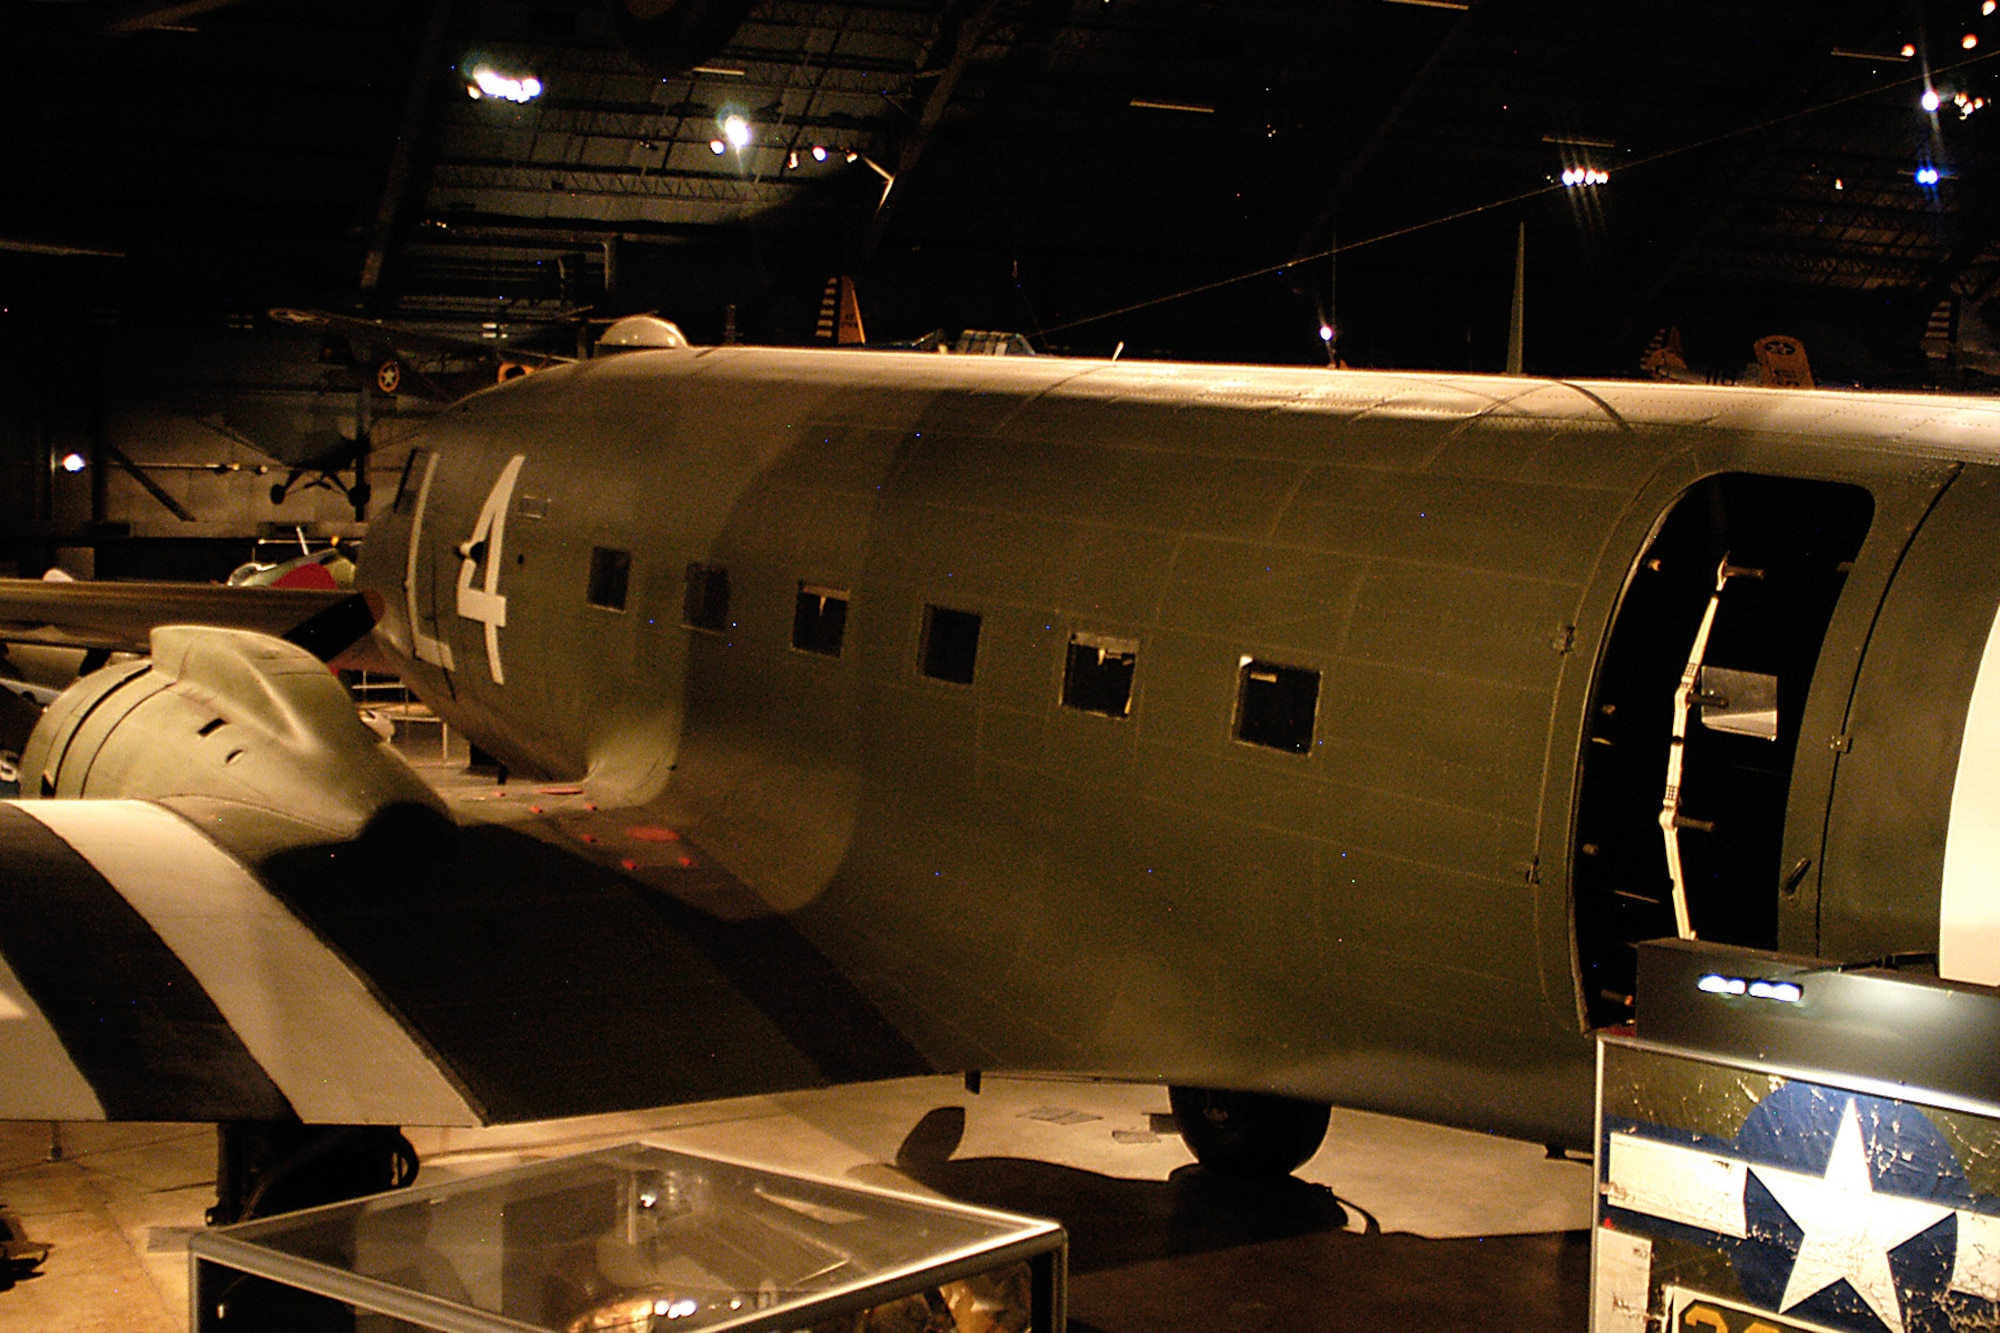 Douglas C-47D Skytrain in the World War II Gallery at the National Museum of the United States Air Force. (U.S. Air Force photo)
